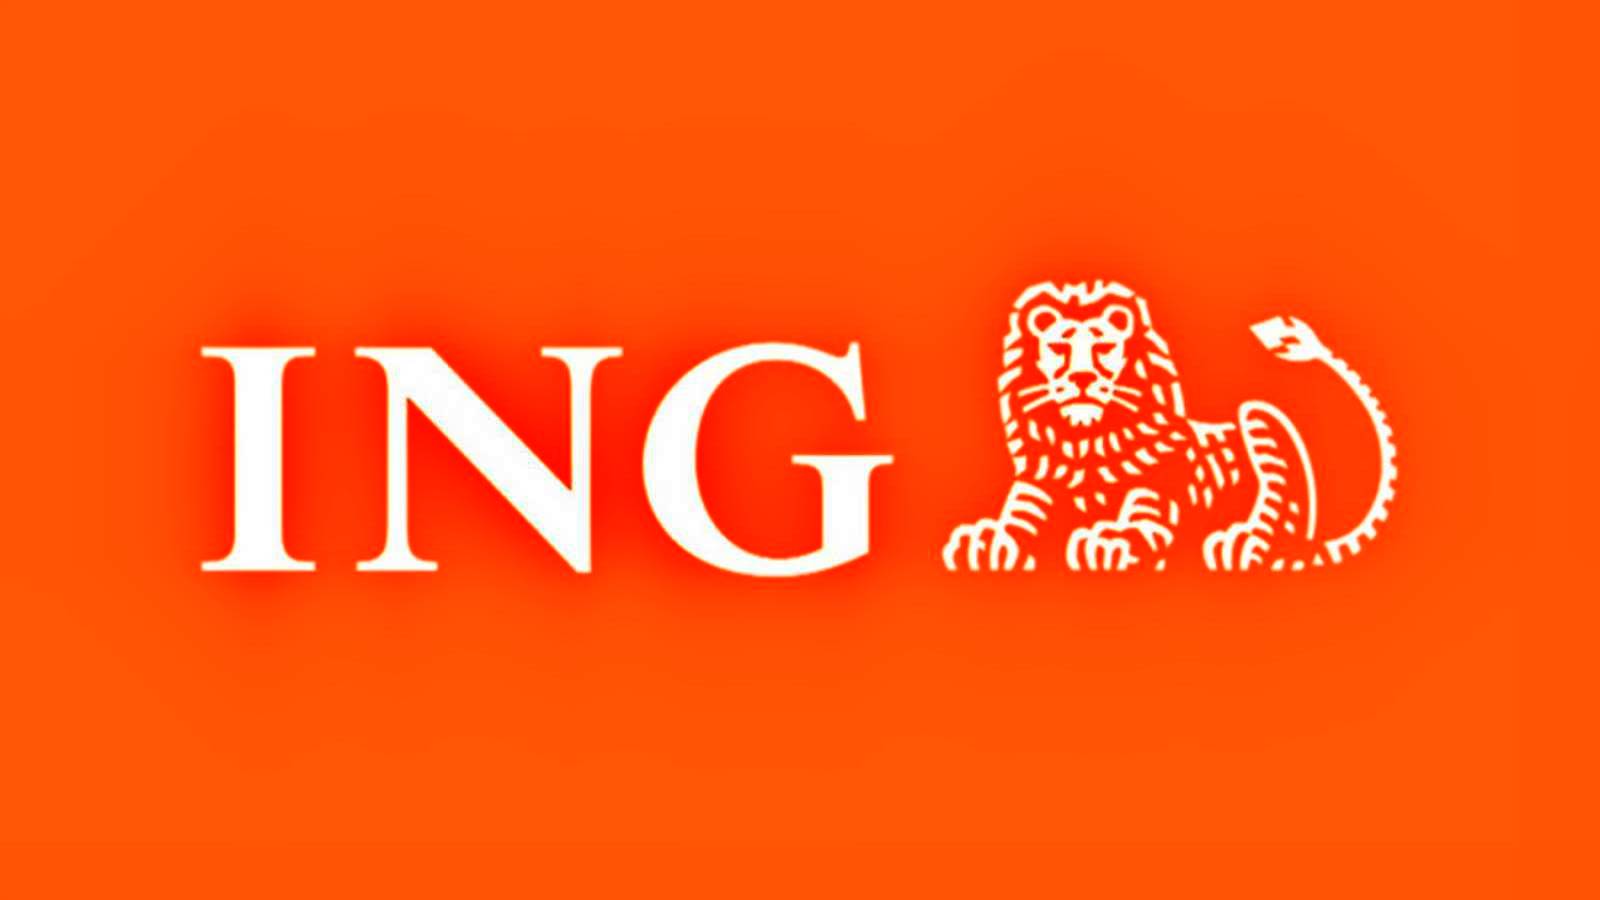 ING Banca illegale